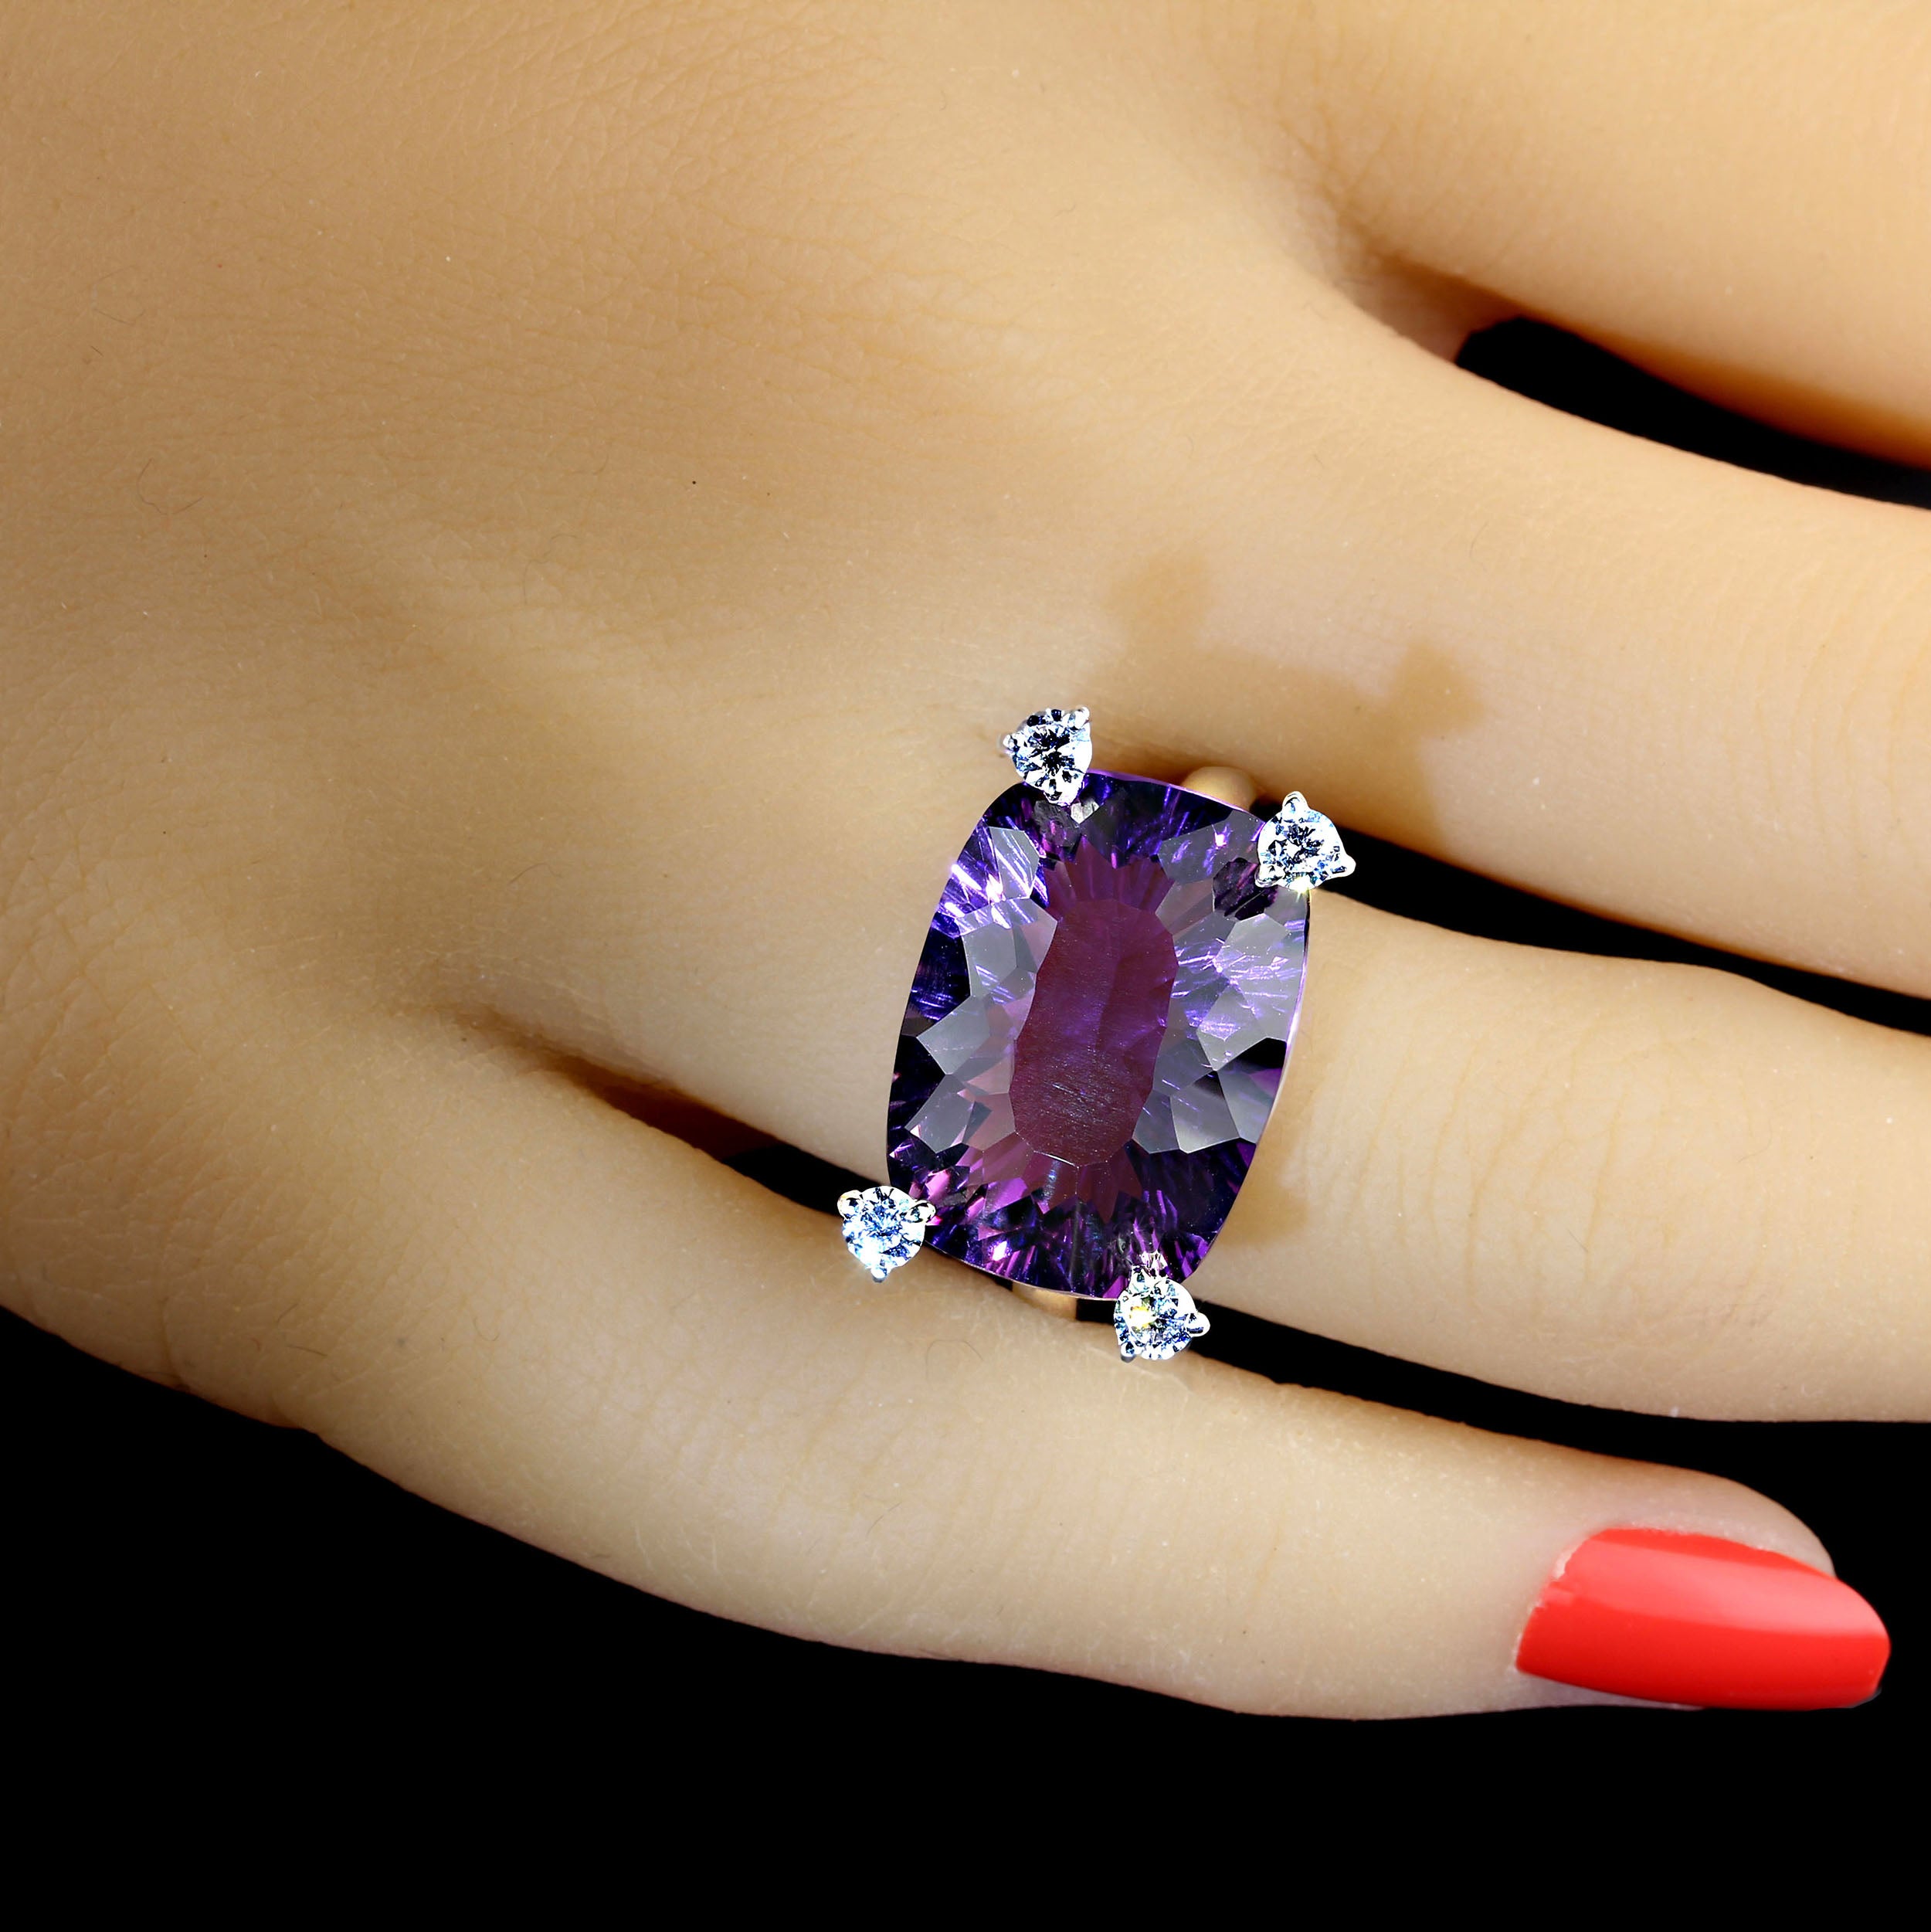 AJD Contemporary Scintillating Amethyst and White Zircon Ring